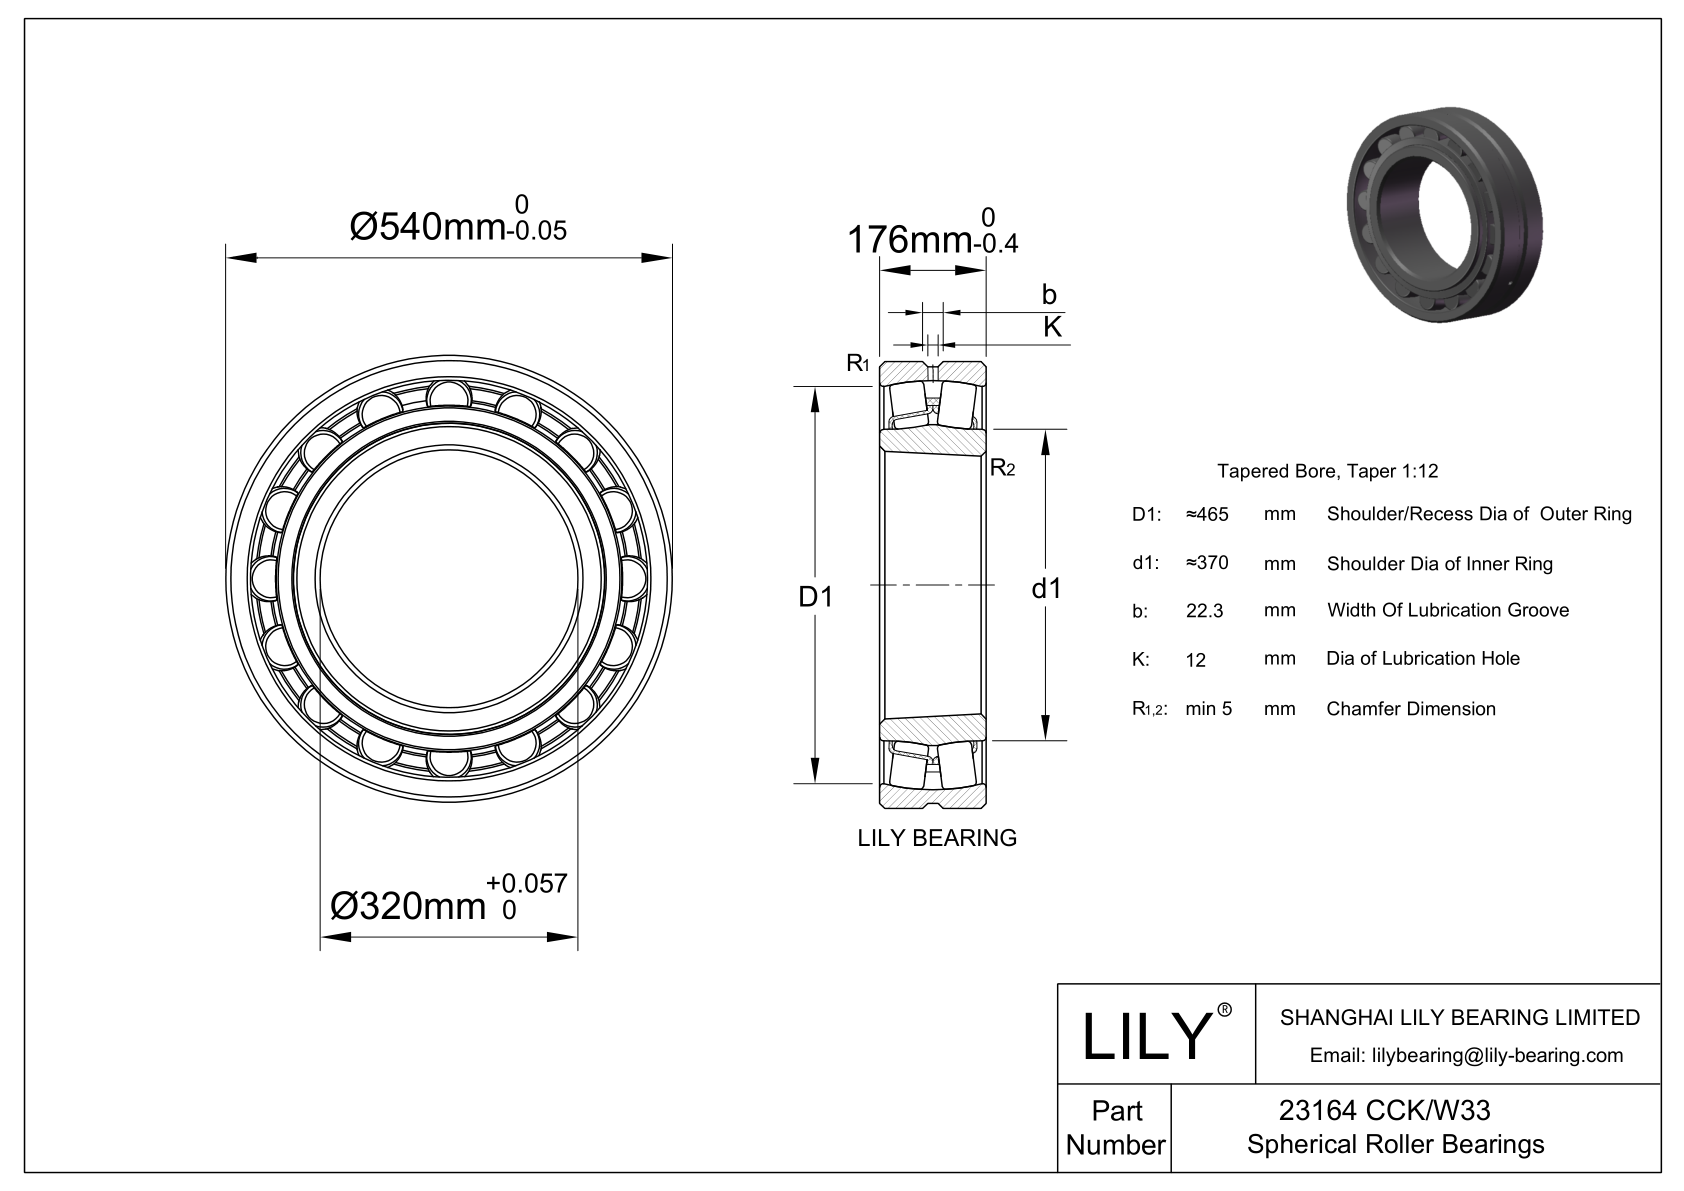 23164 CCK/W33 Double Row Spherical Roller Bearing cad drawing